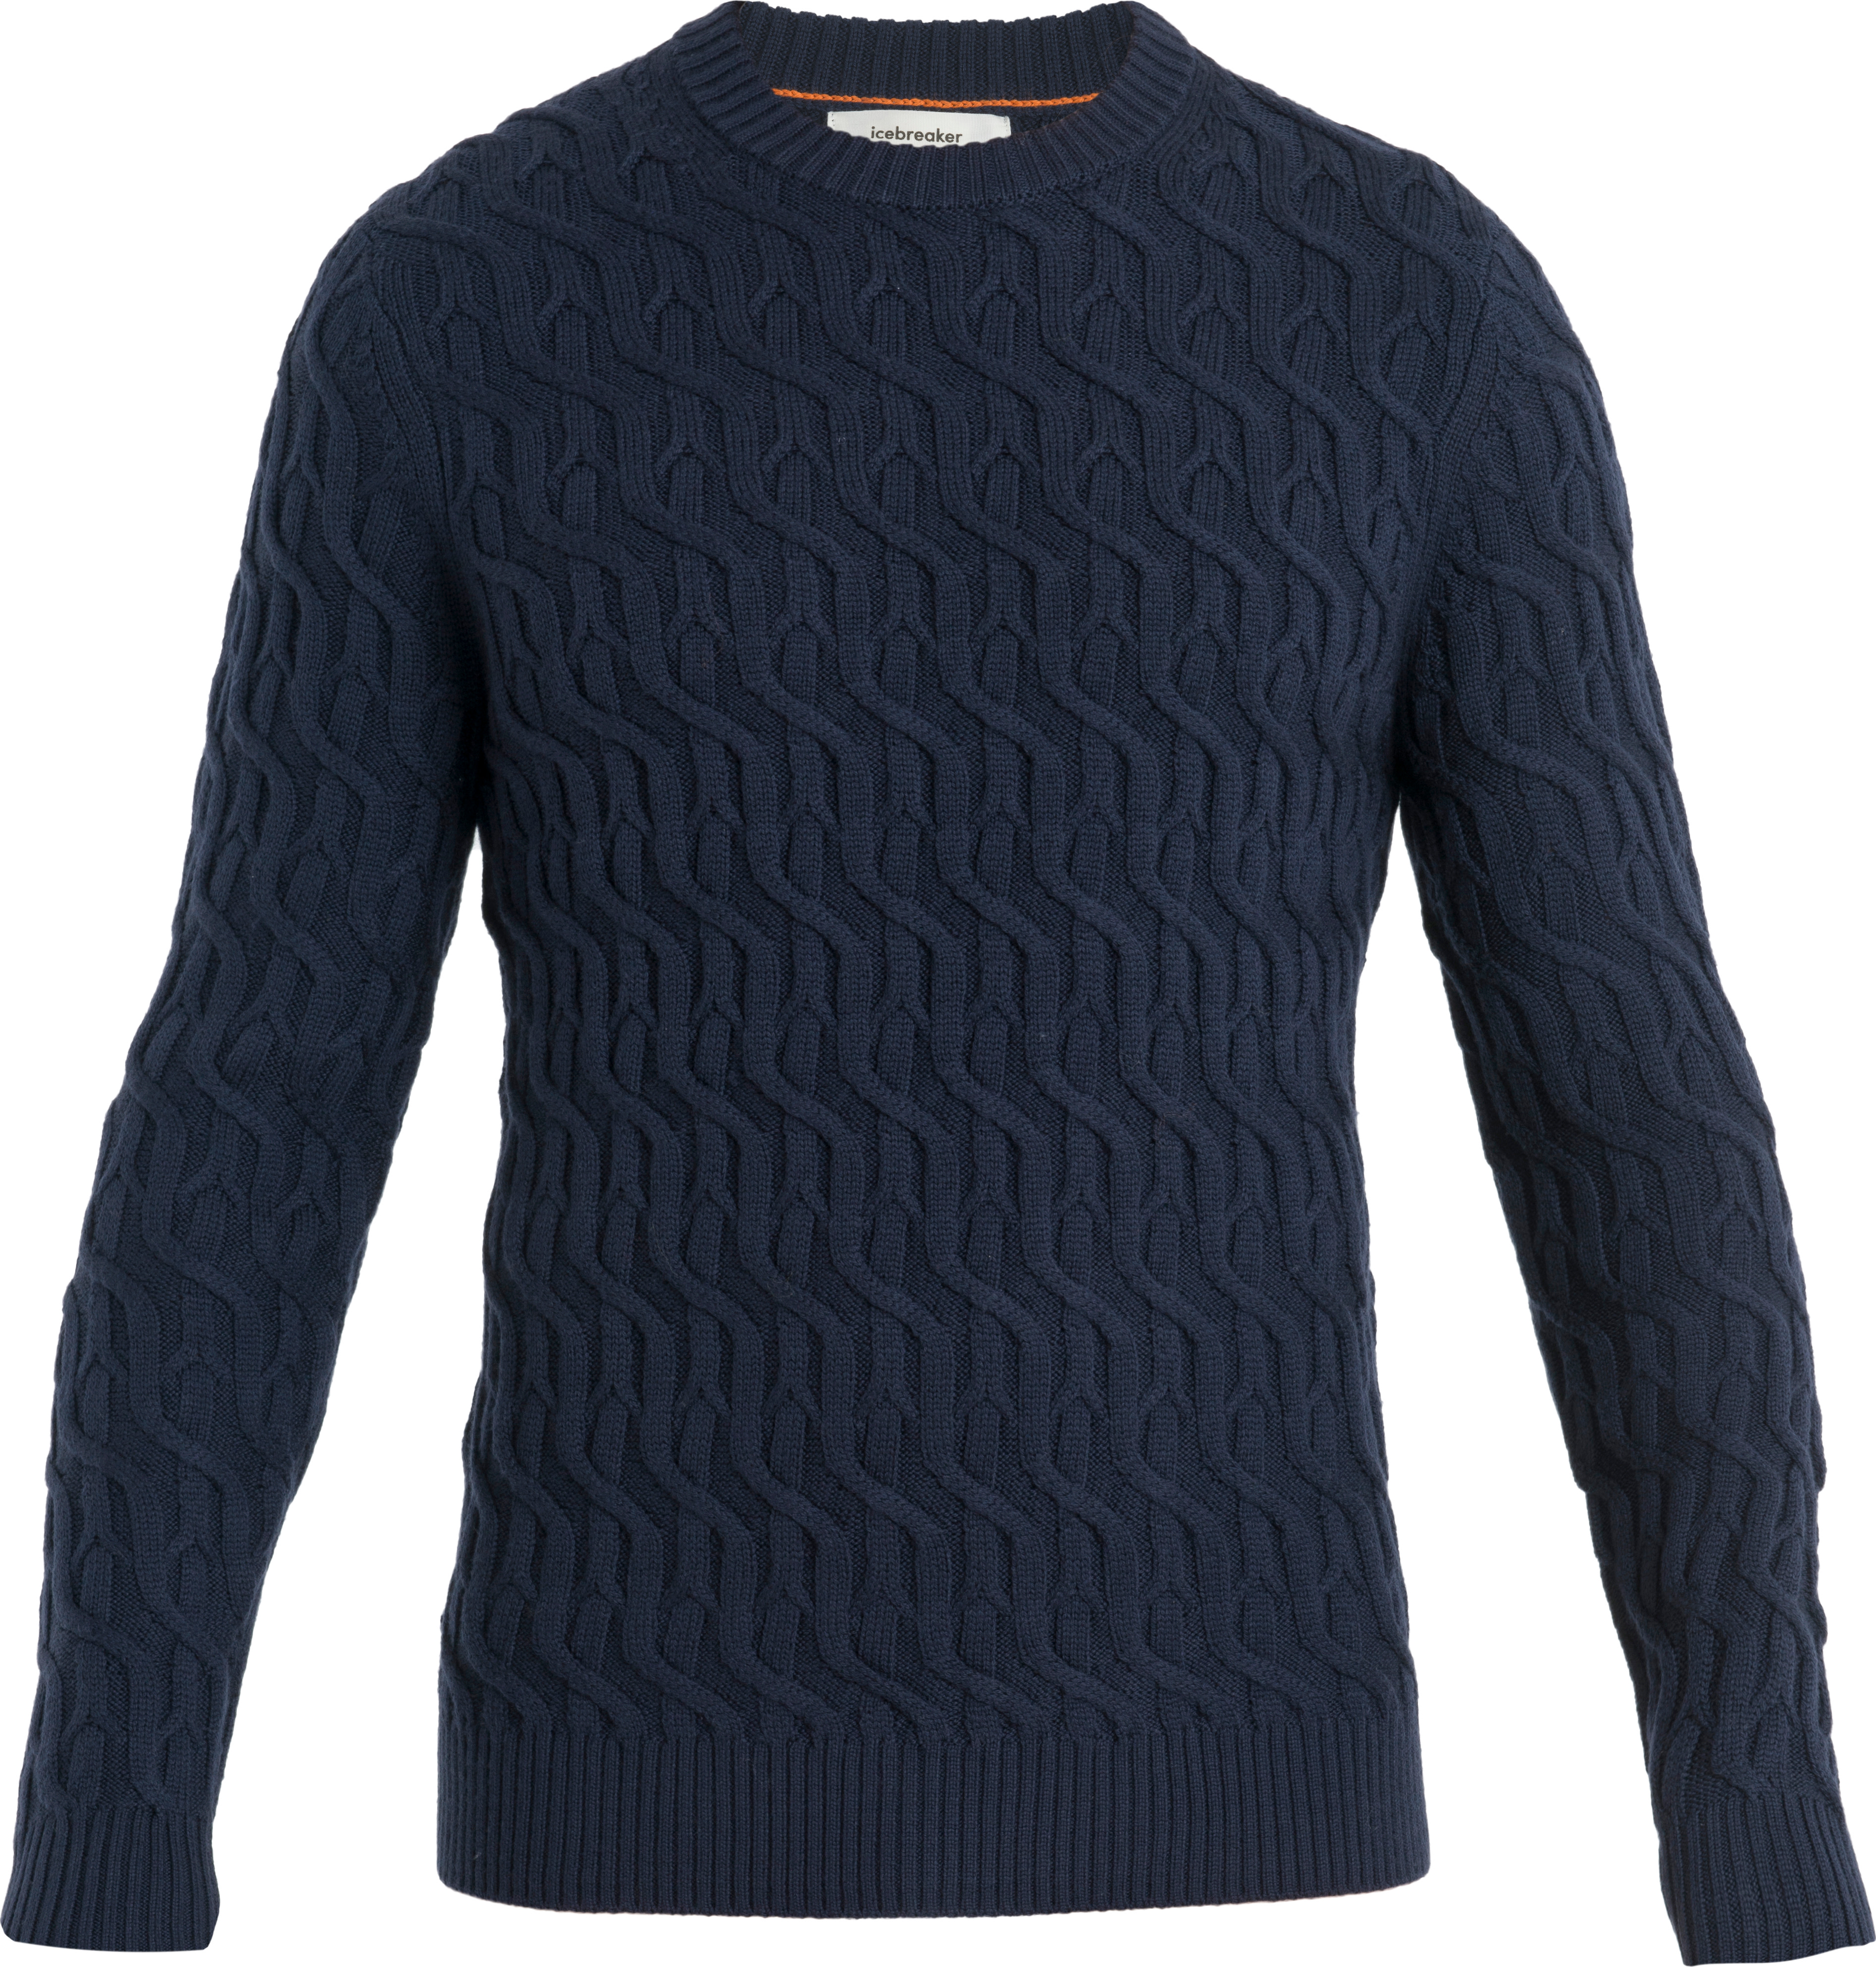 Men’s Mer Cable Knit Crewe Sweater Midnight Navy